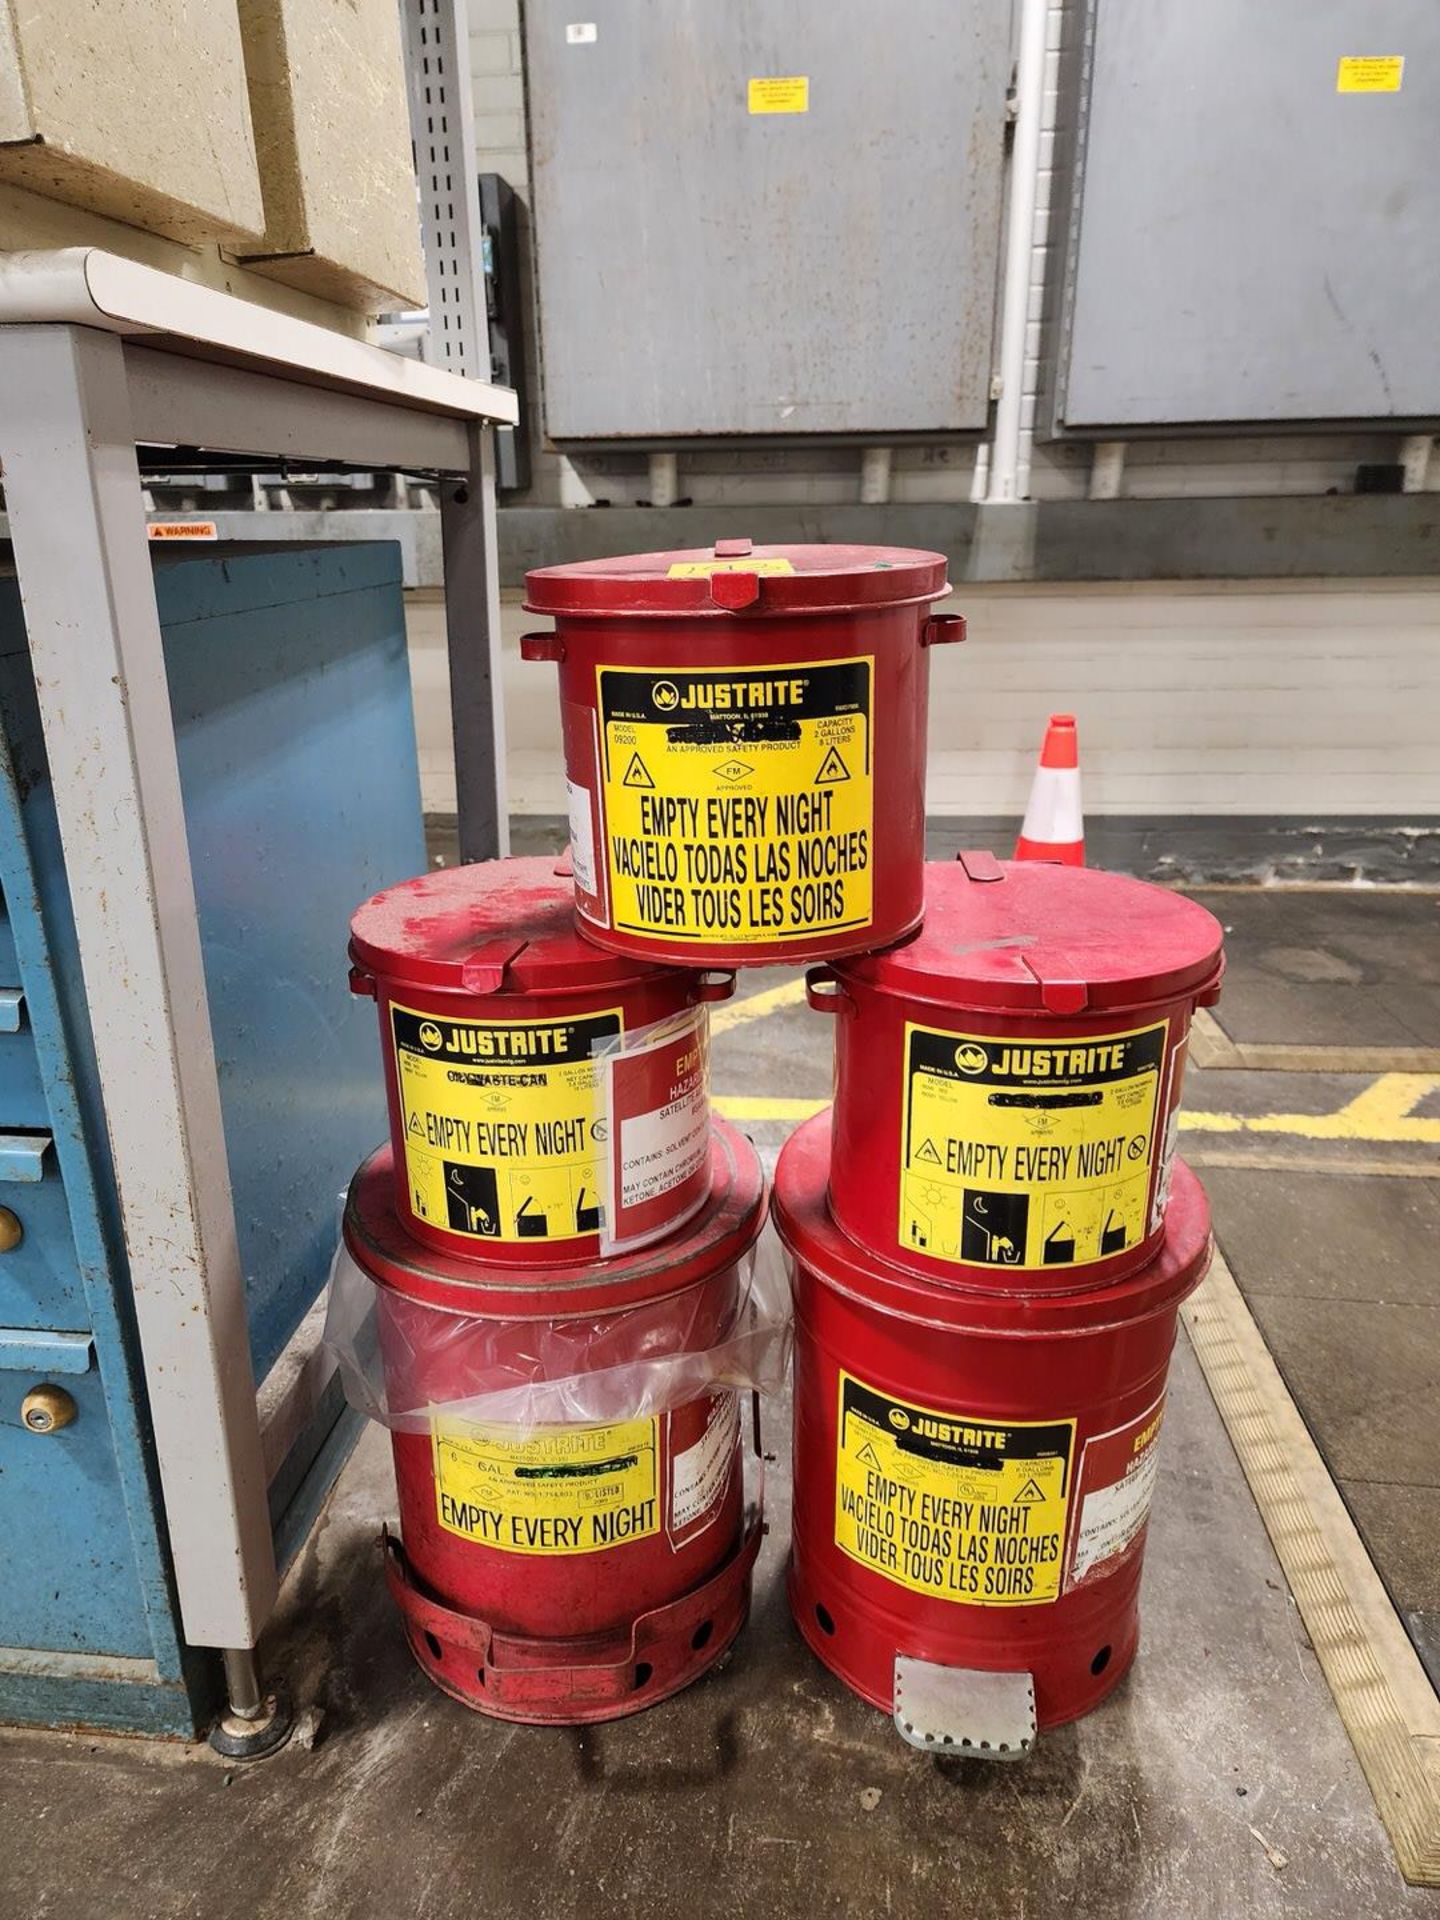 Justrite (5) 2gal Oily Rag Containers (Location: Chem Shop Area)